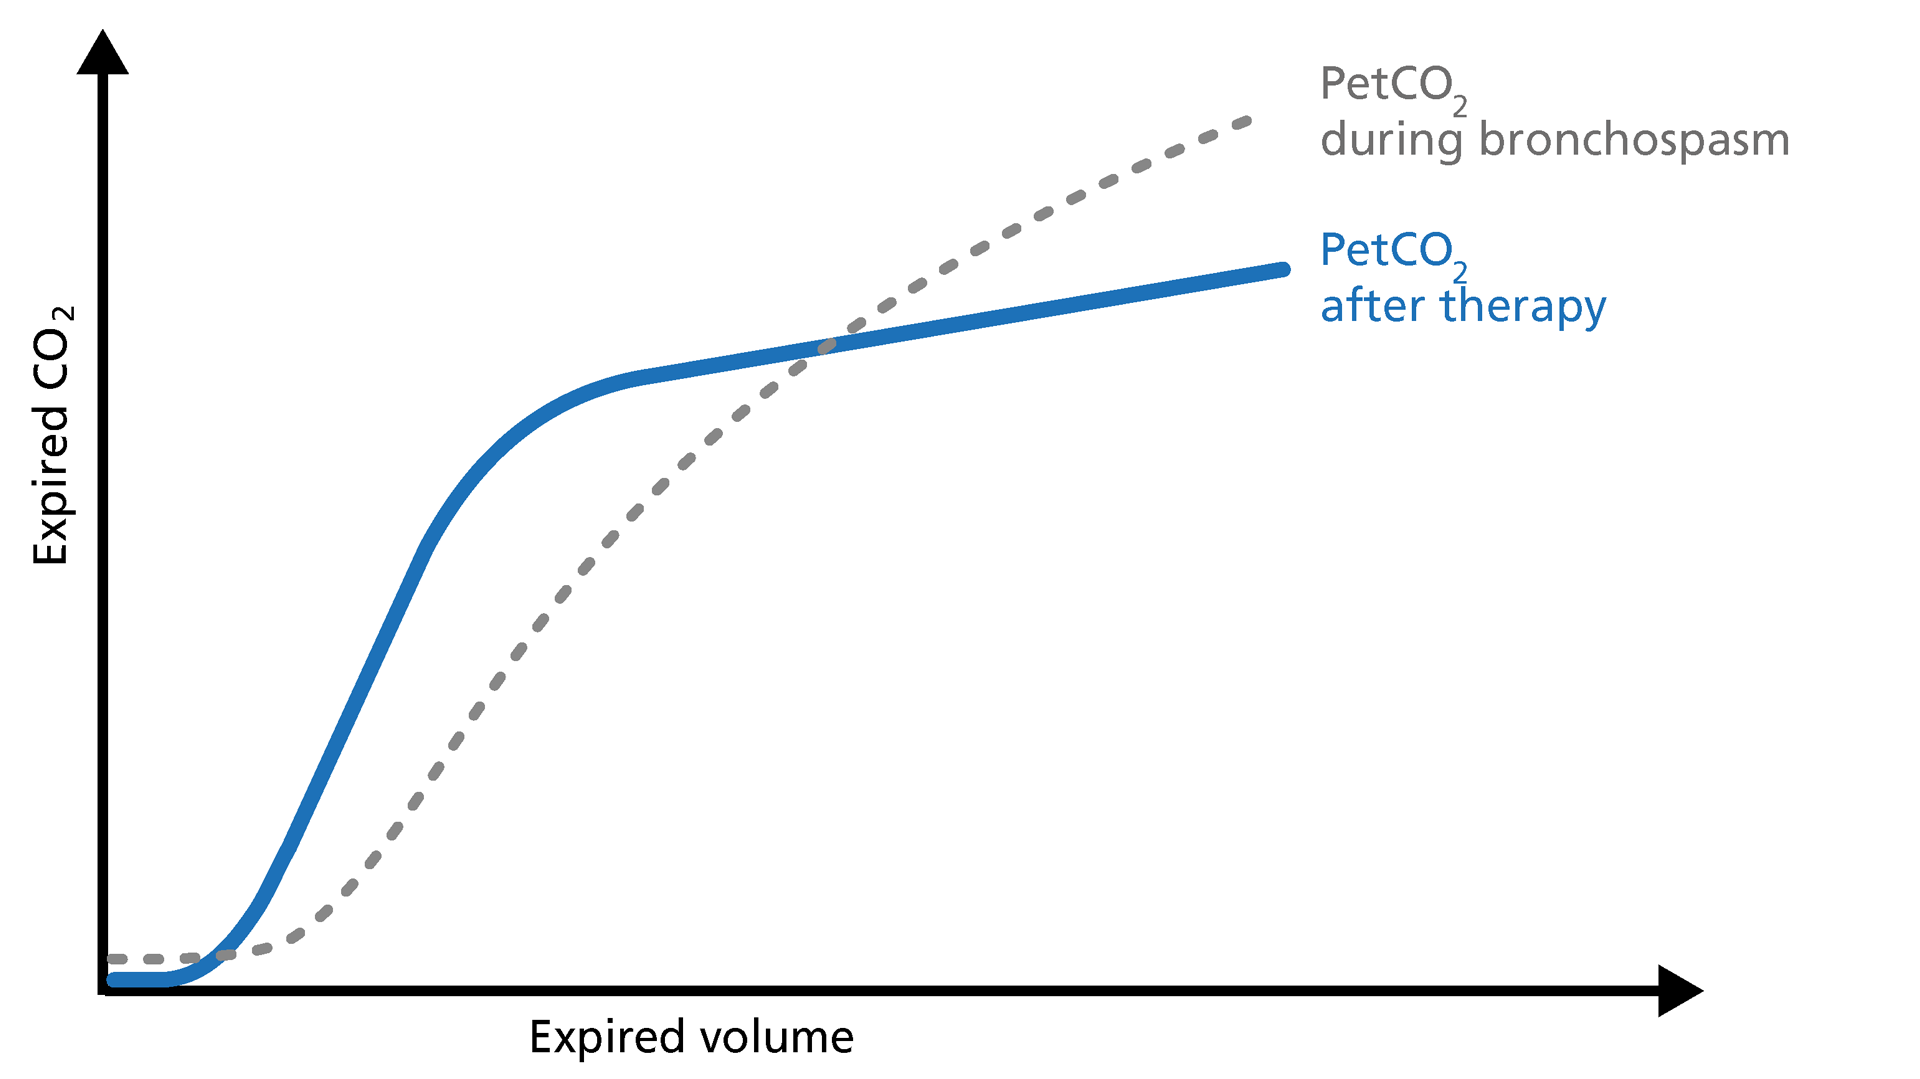 Illustration of PetCo2 in COPD patients after therapy on a volumetric capnogram